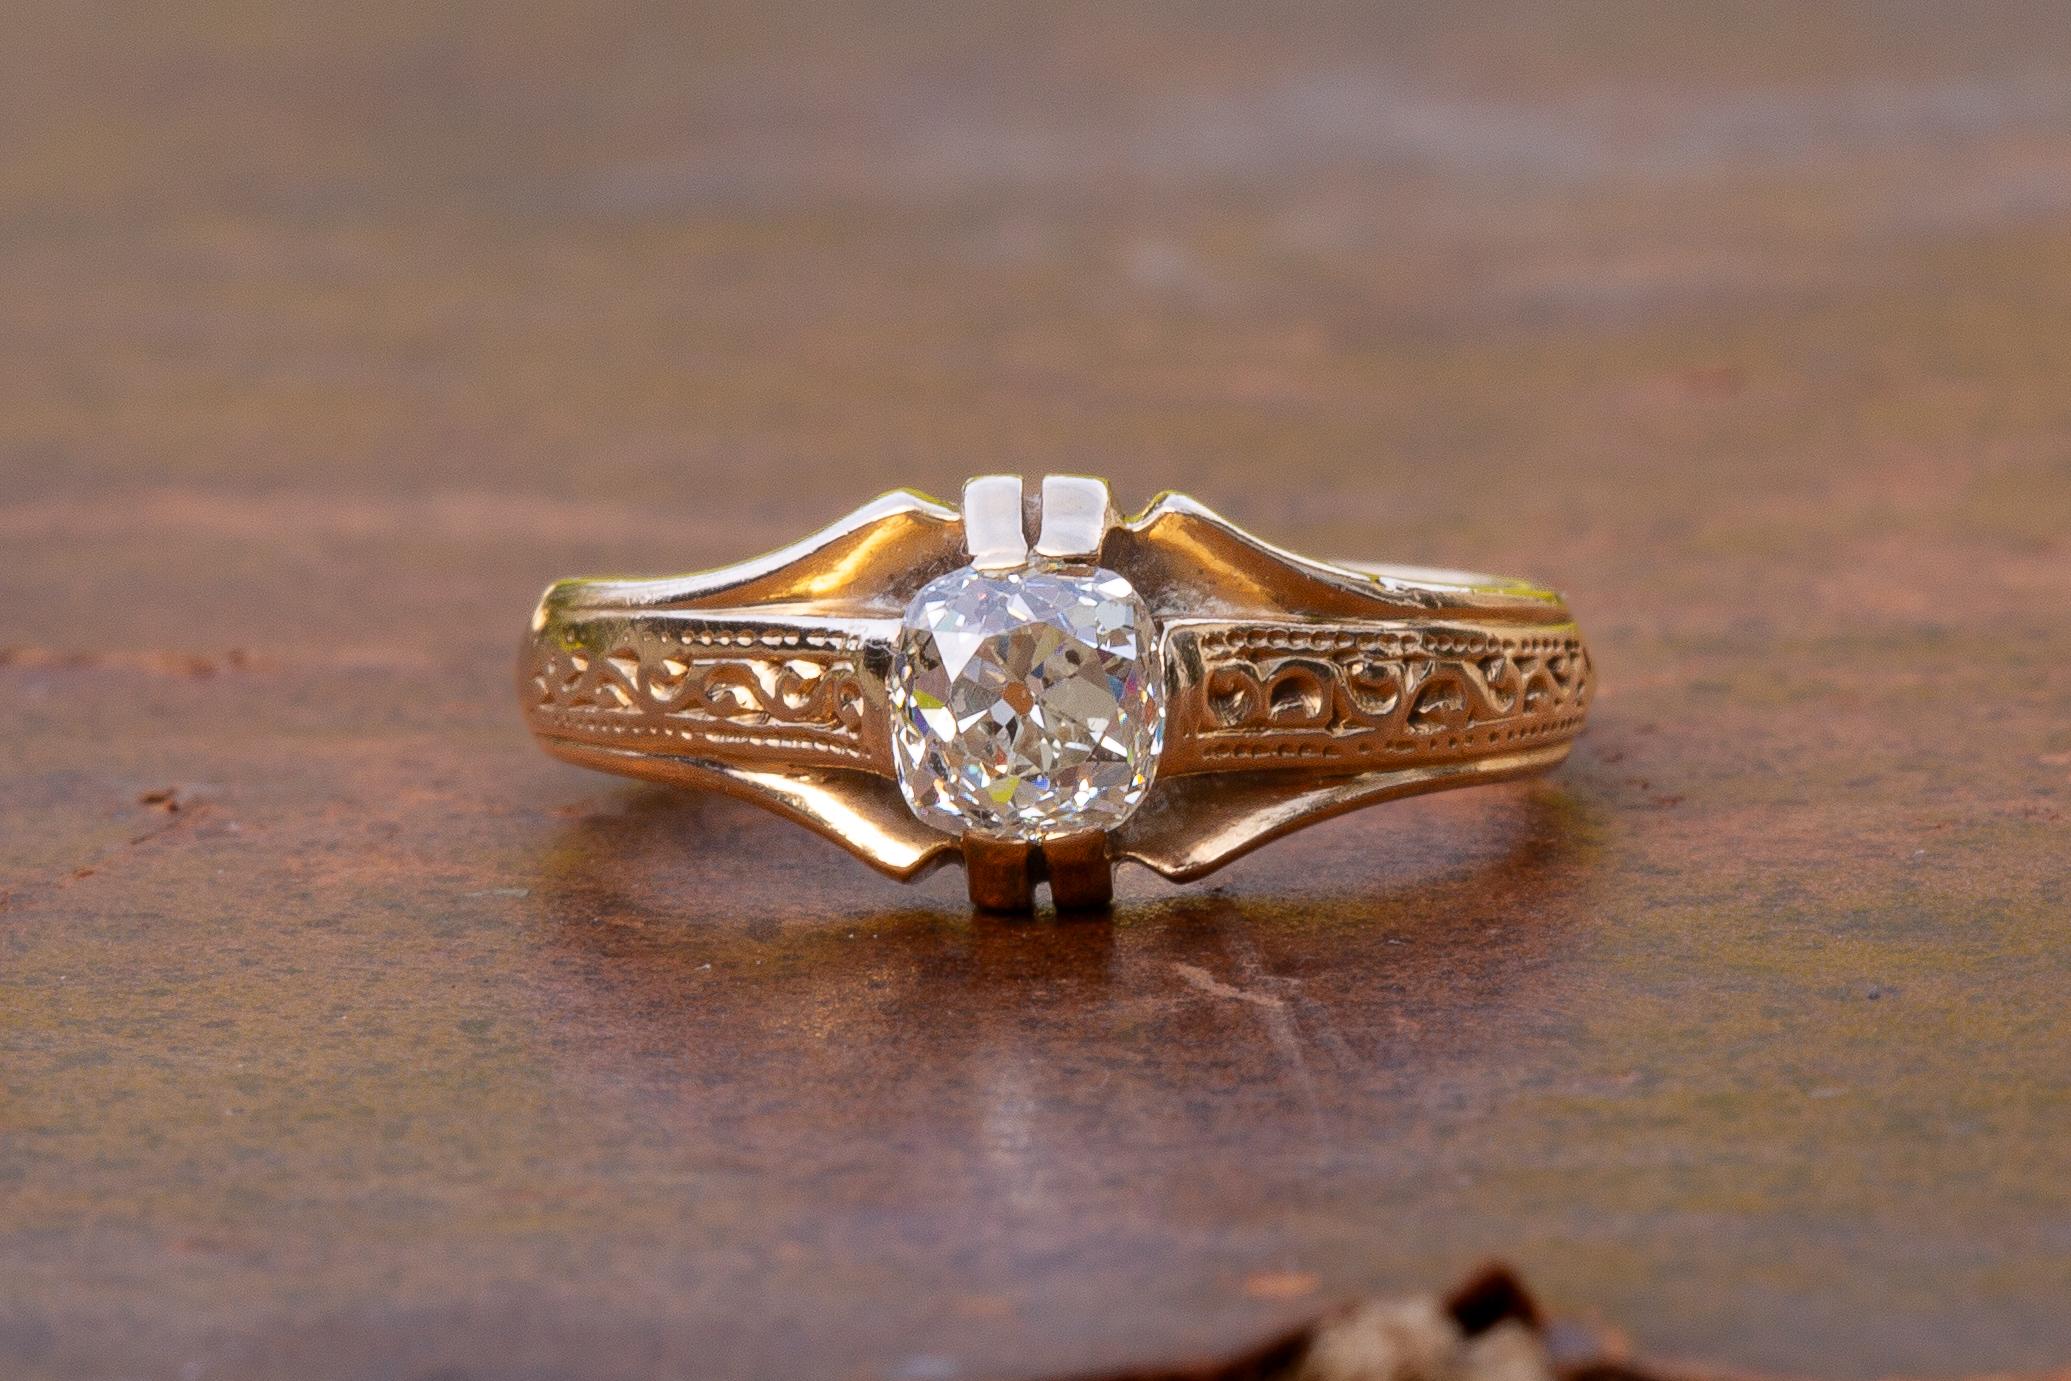 This beautiful antique diamond solitaire was made in Austro-Hungaria, circa 1900. The ring is set with a fantastically bright and sparkly cushion cut diamond, weighing 0.65ct.

The ring is crafted in solid 14K gold and the shoulders are intricately